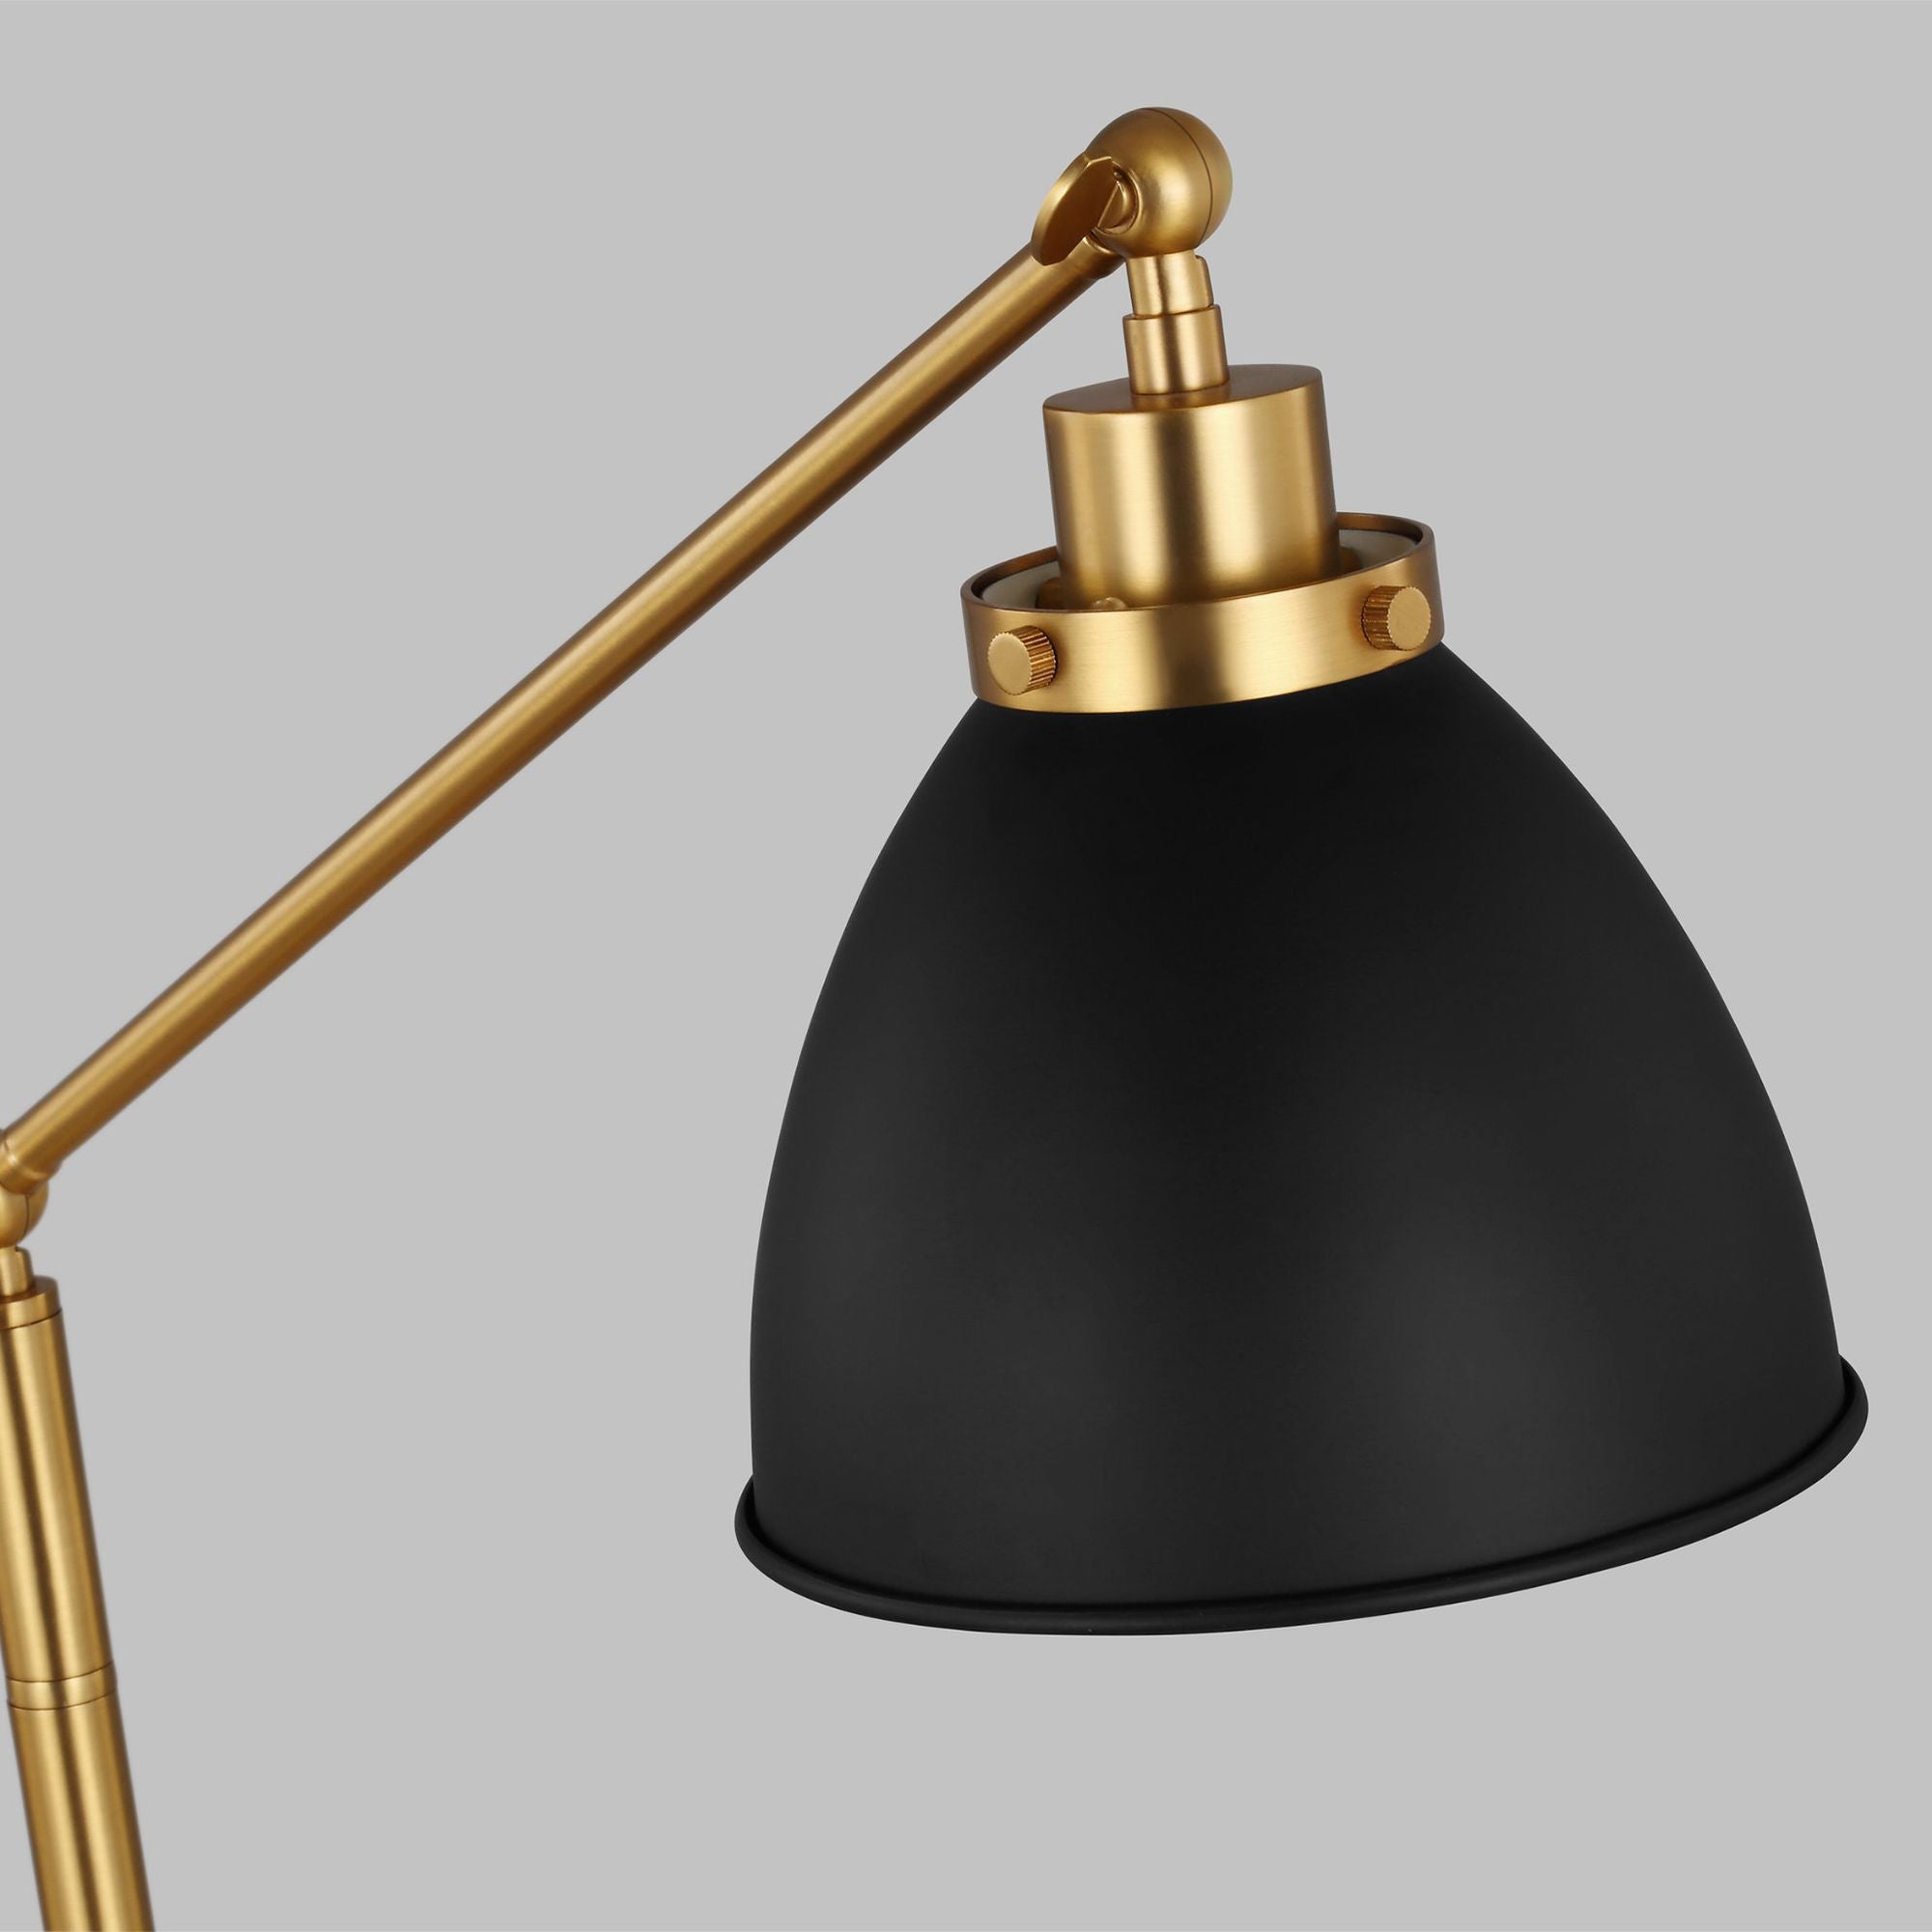 Chapman & Myers Wellfleet Dome Desk Lamp in Midnight Black and Burnished Brass